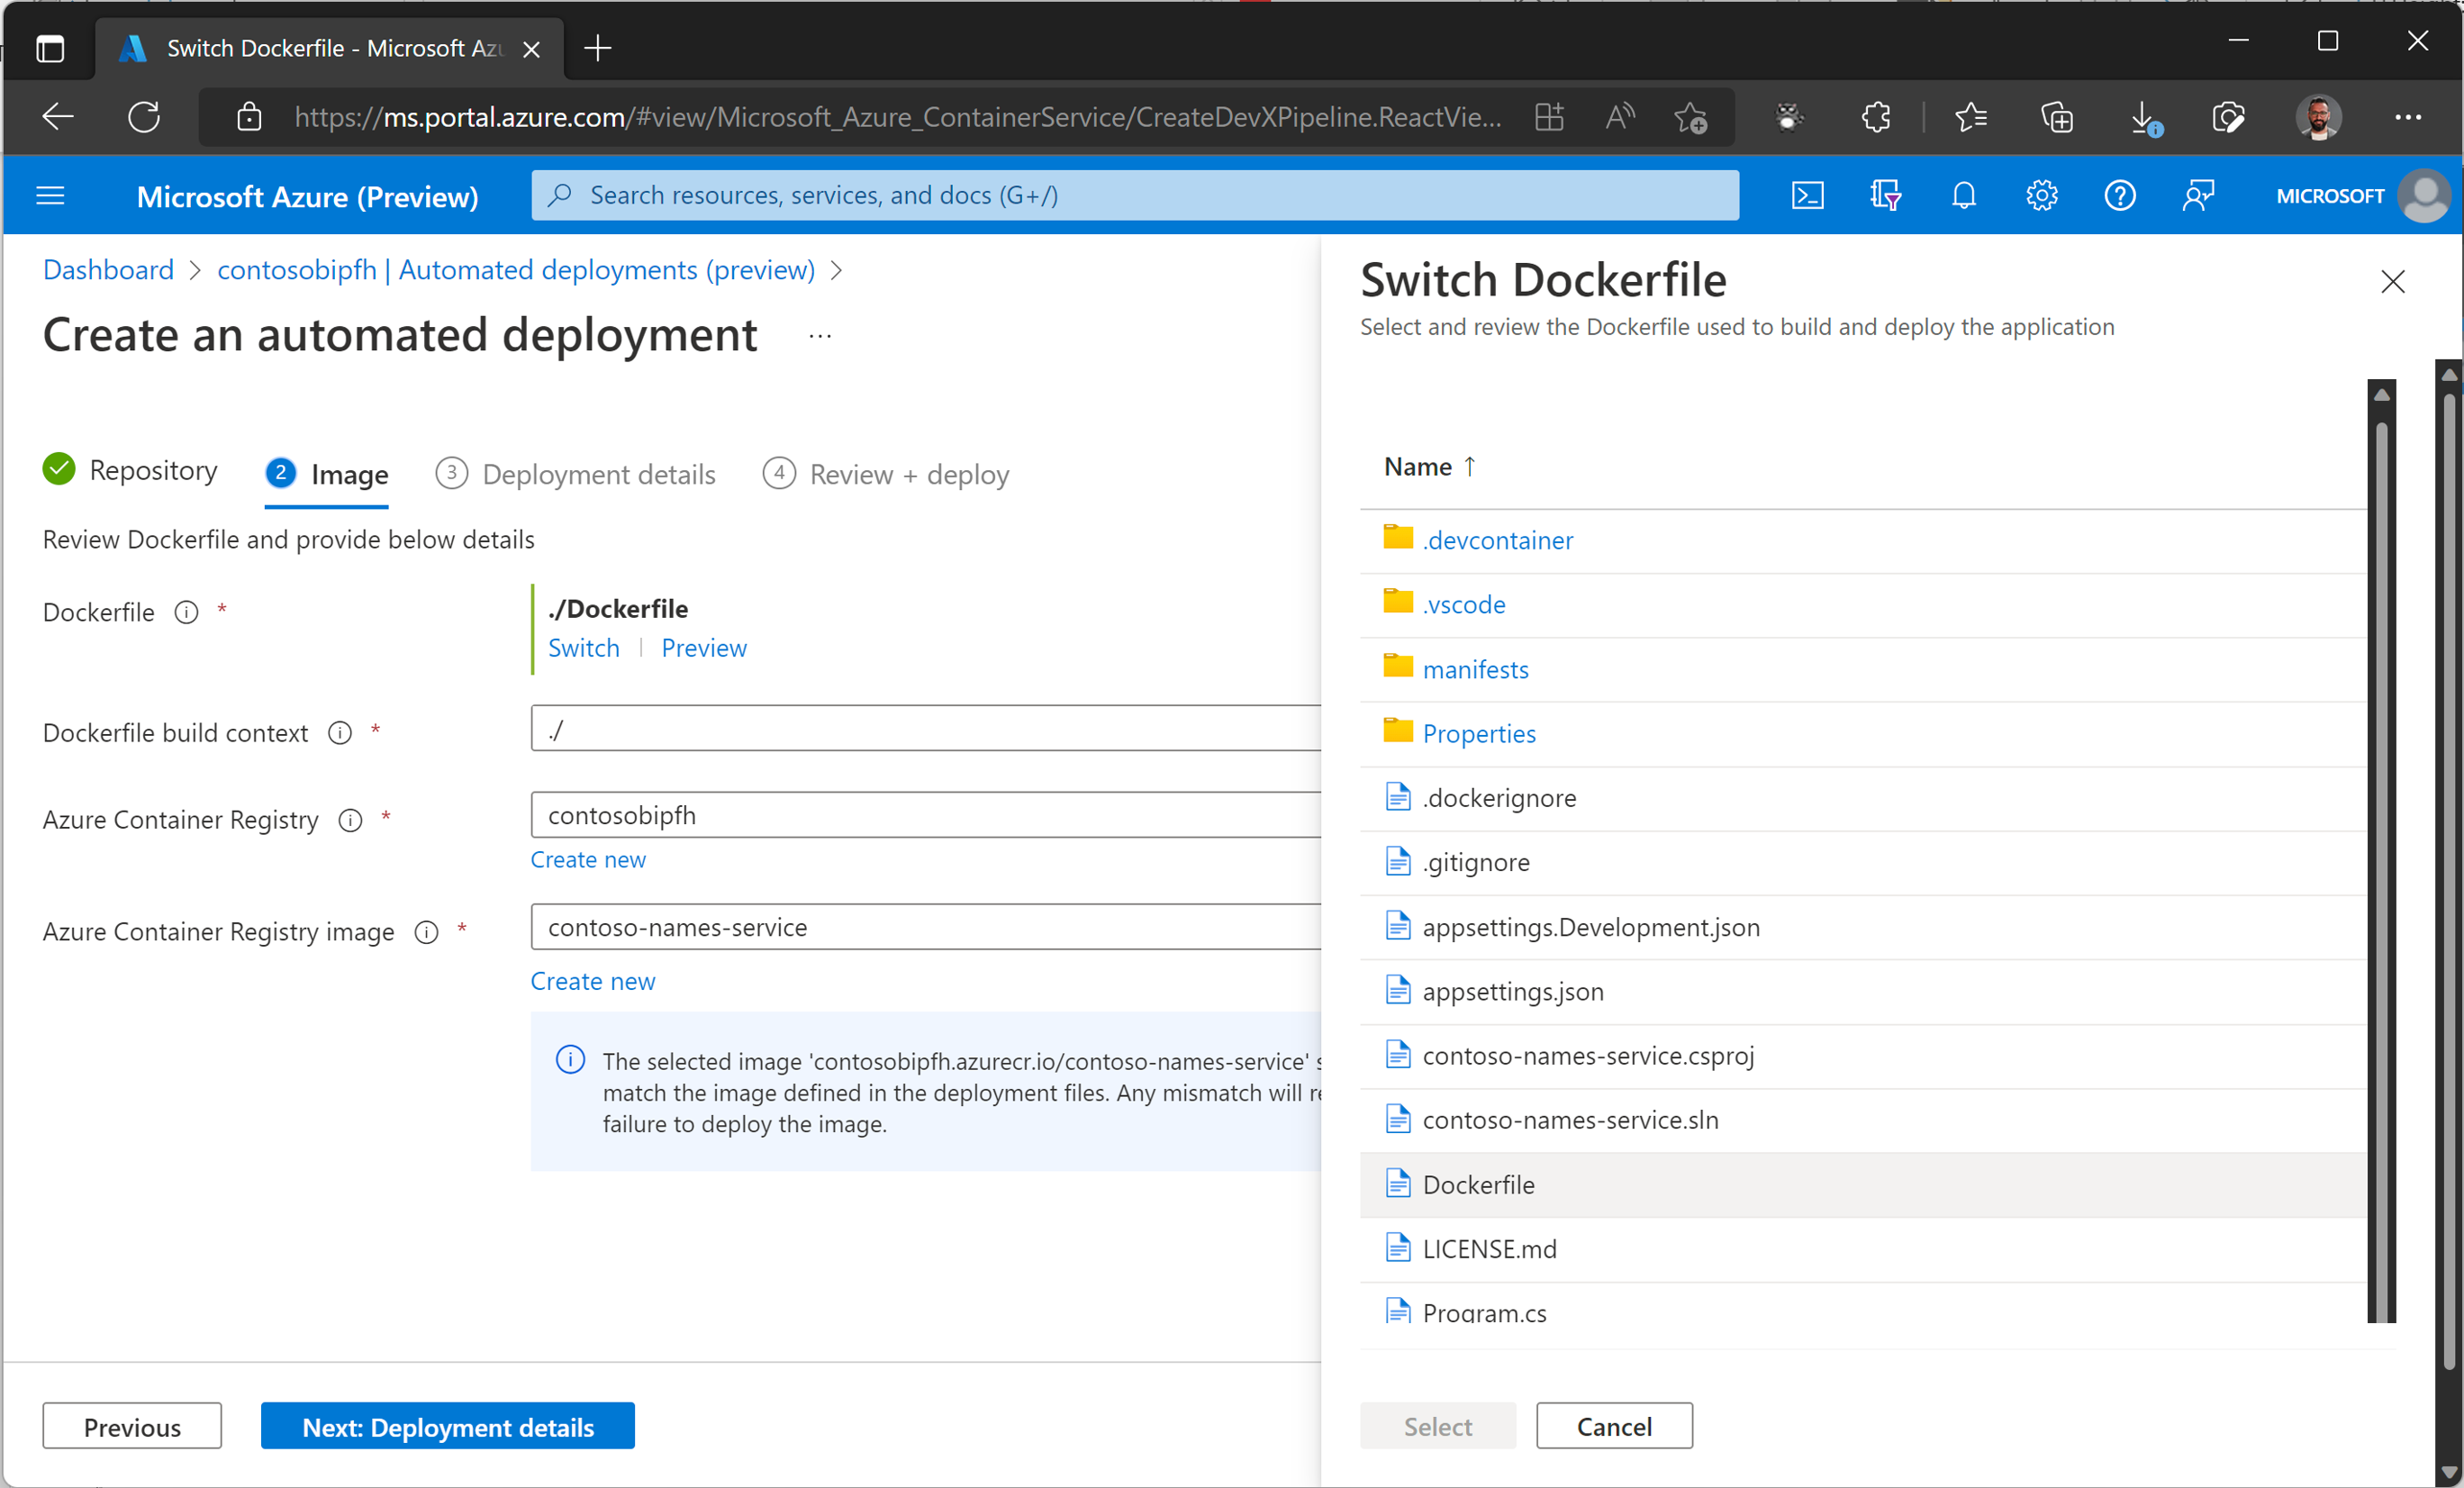 Select Dockerfile and Azure Container Registry details